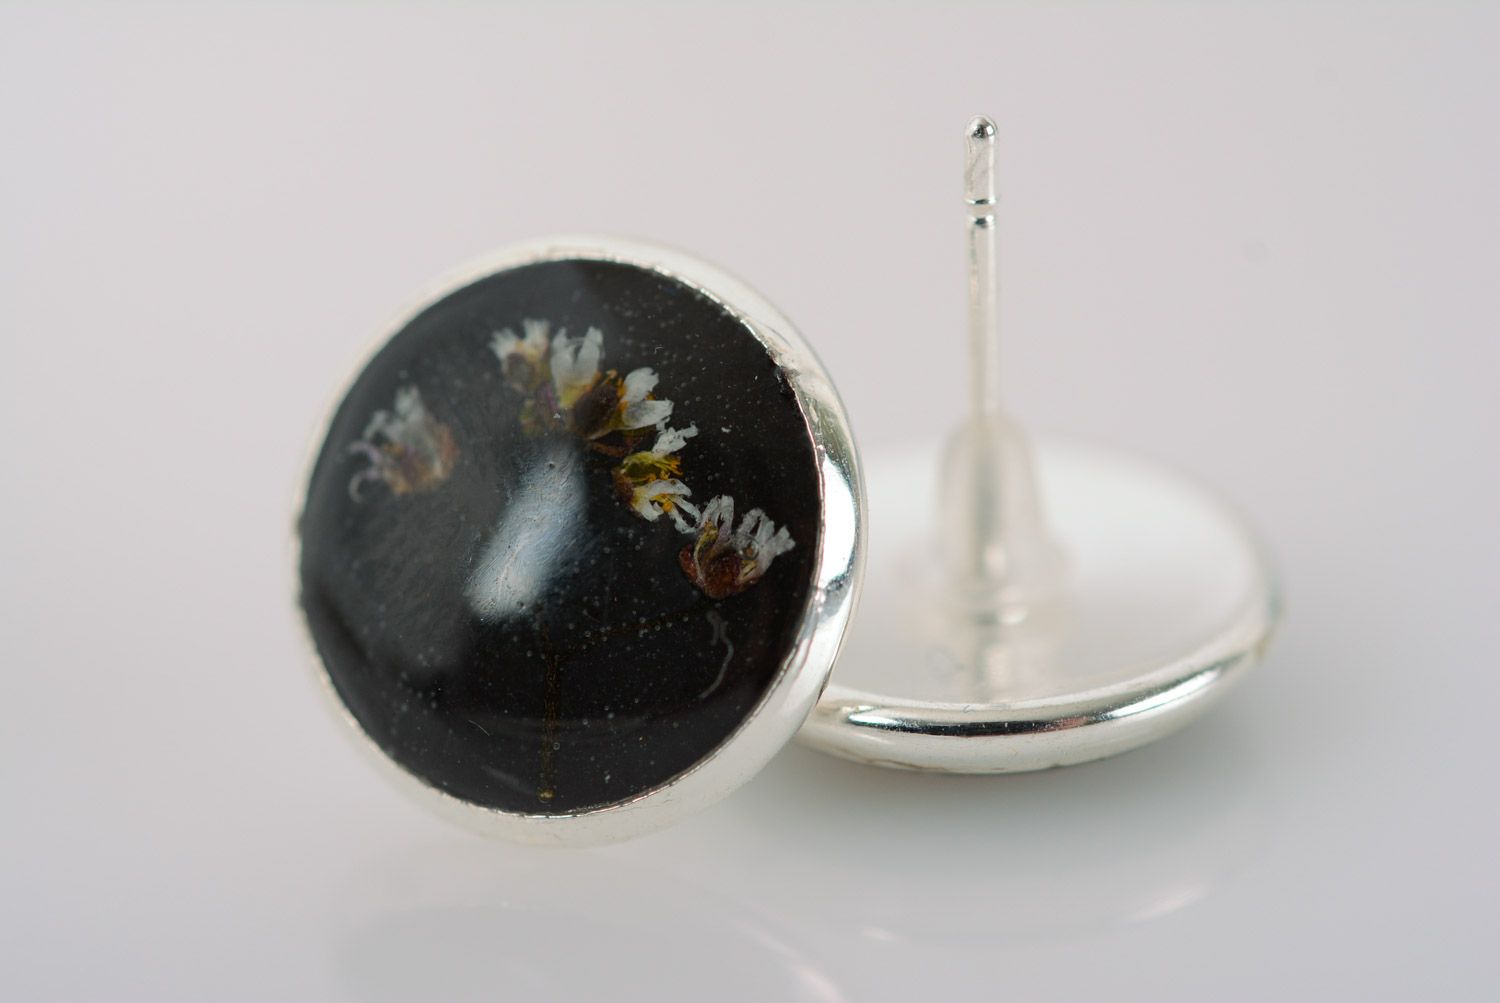 Homemade small black stud earrings with dried flower embedded in epoxy resin photo 5